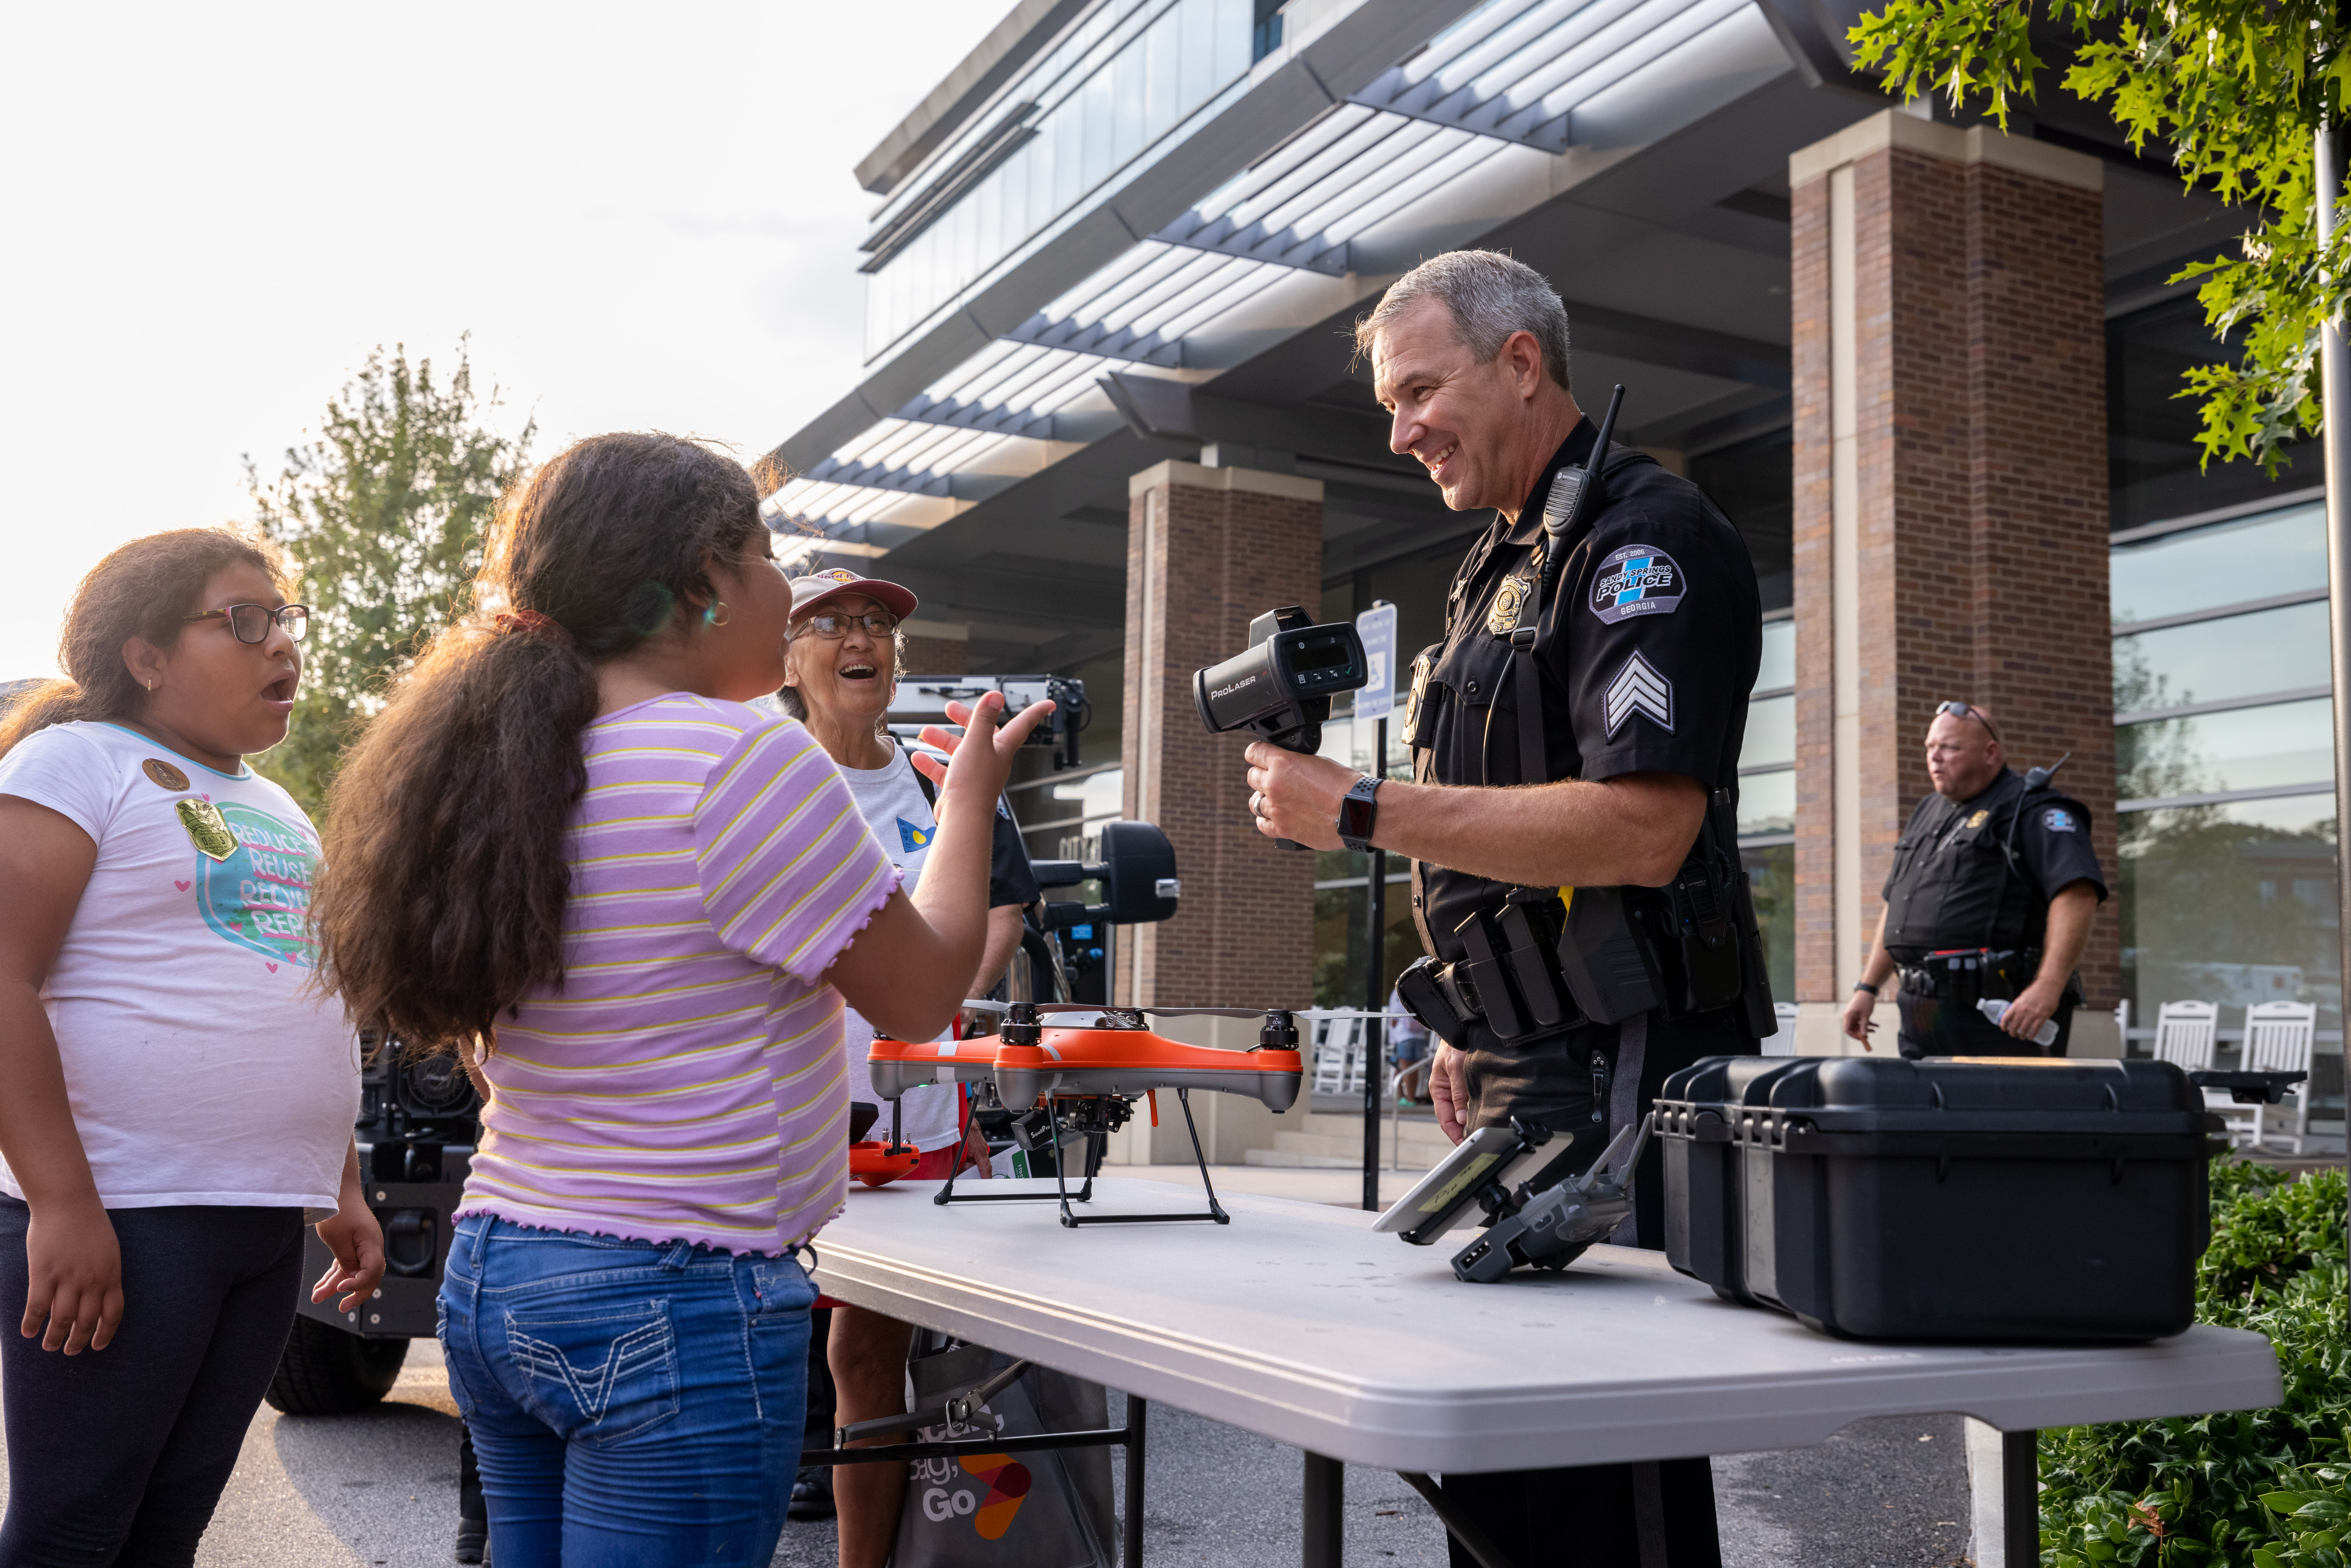 A Police Officer demonstrates police equipment to a family.